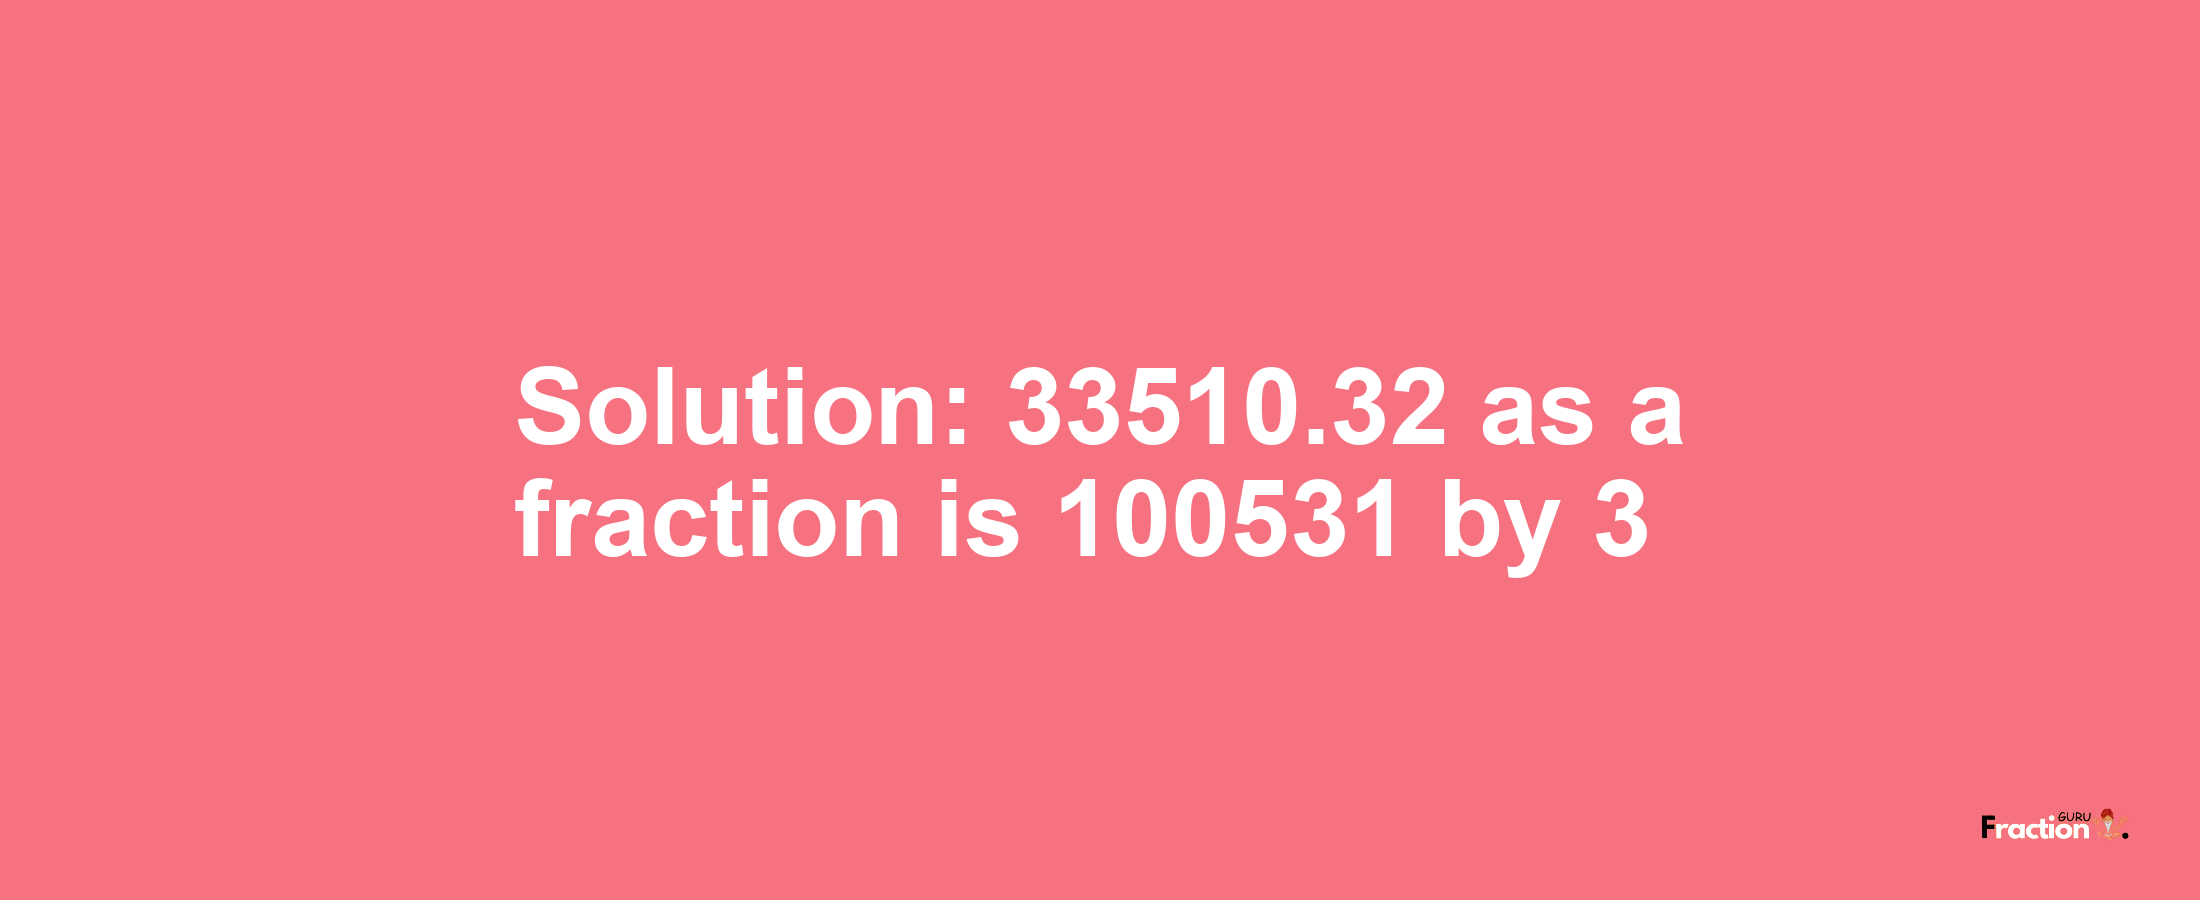 Solution:33510.32 as a fraction is 100531/3